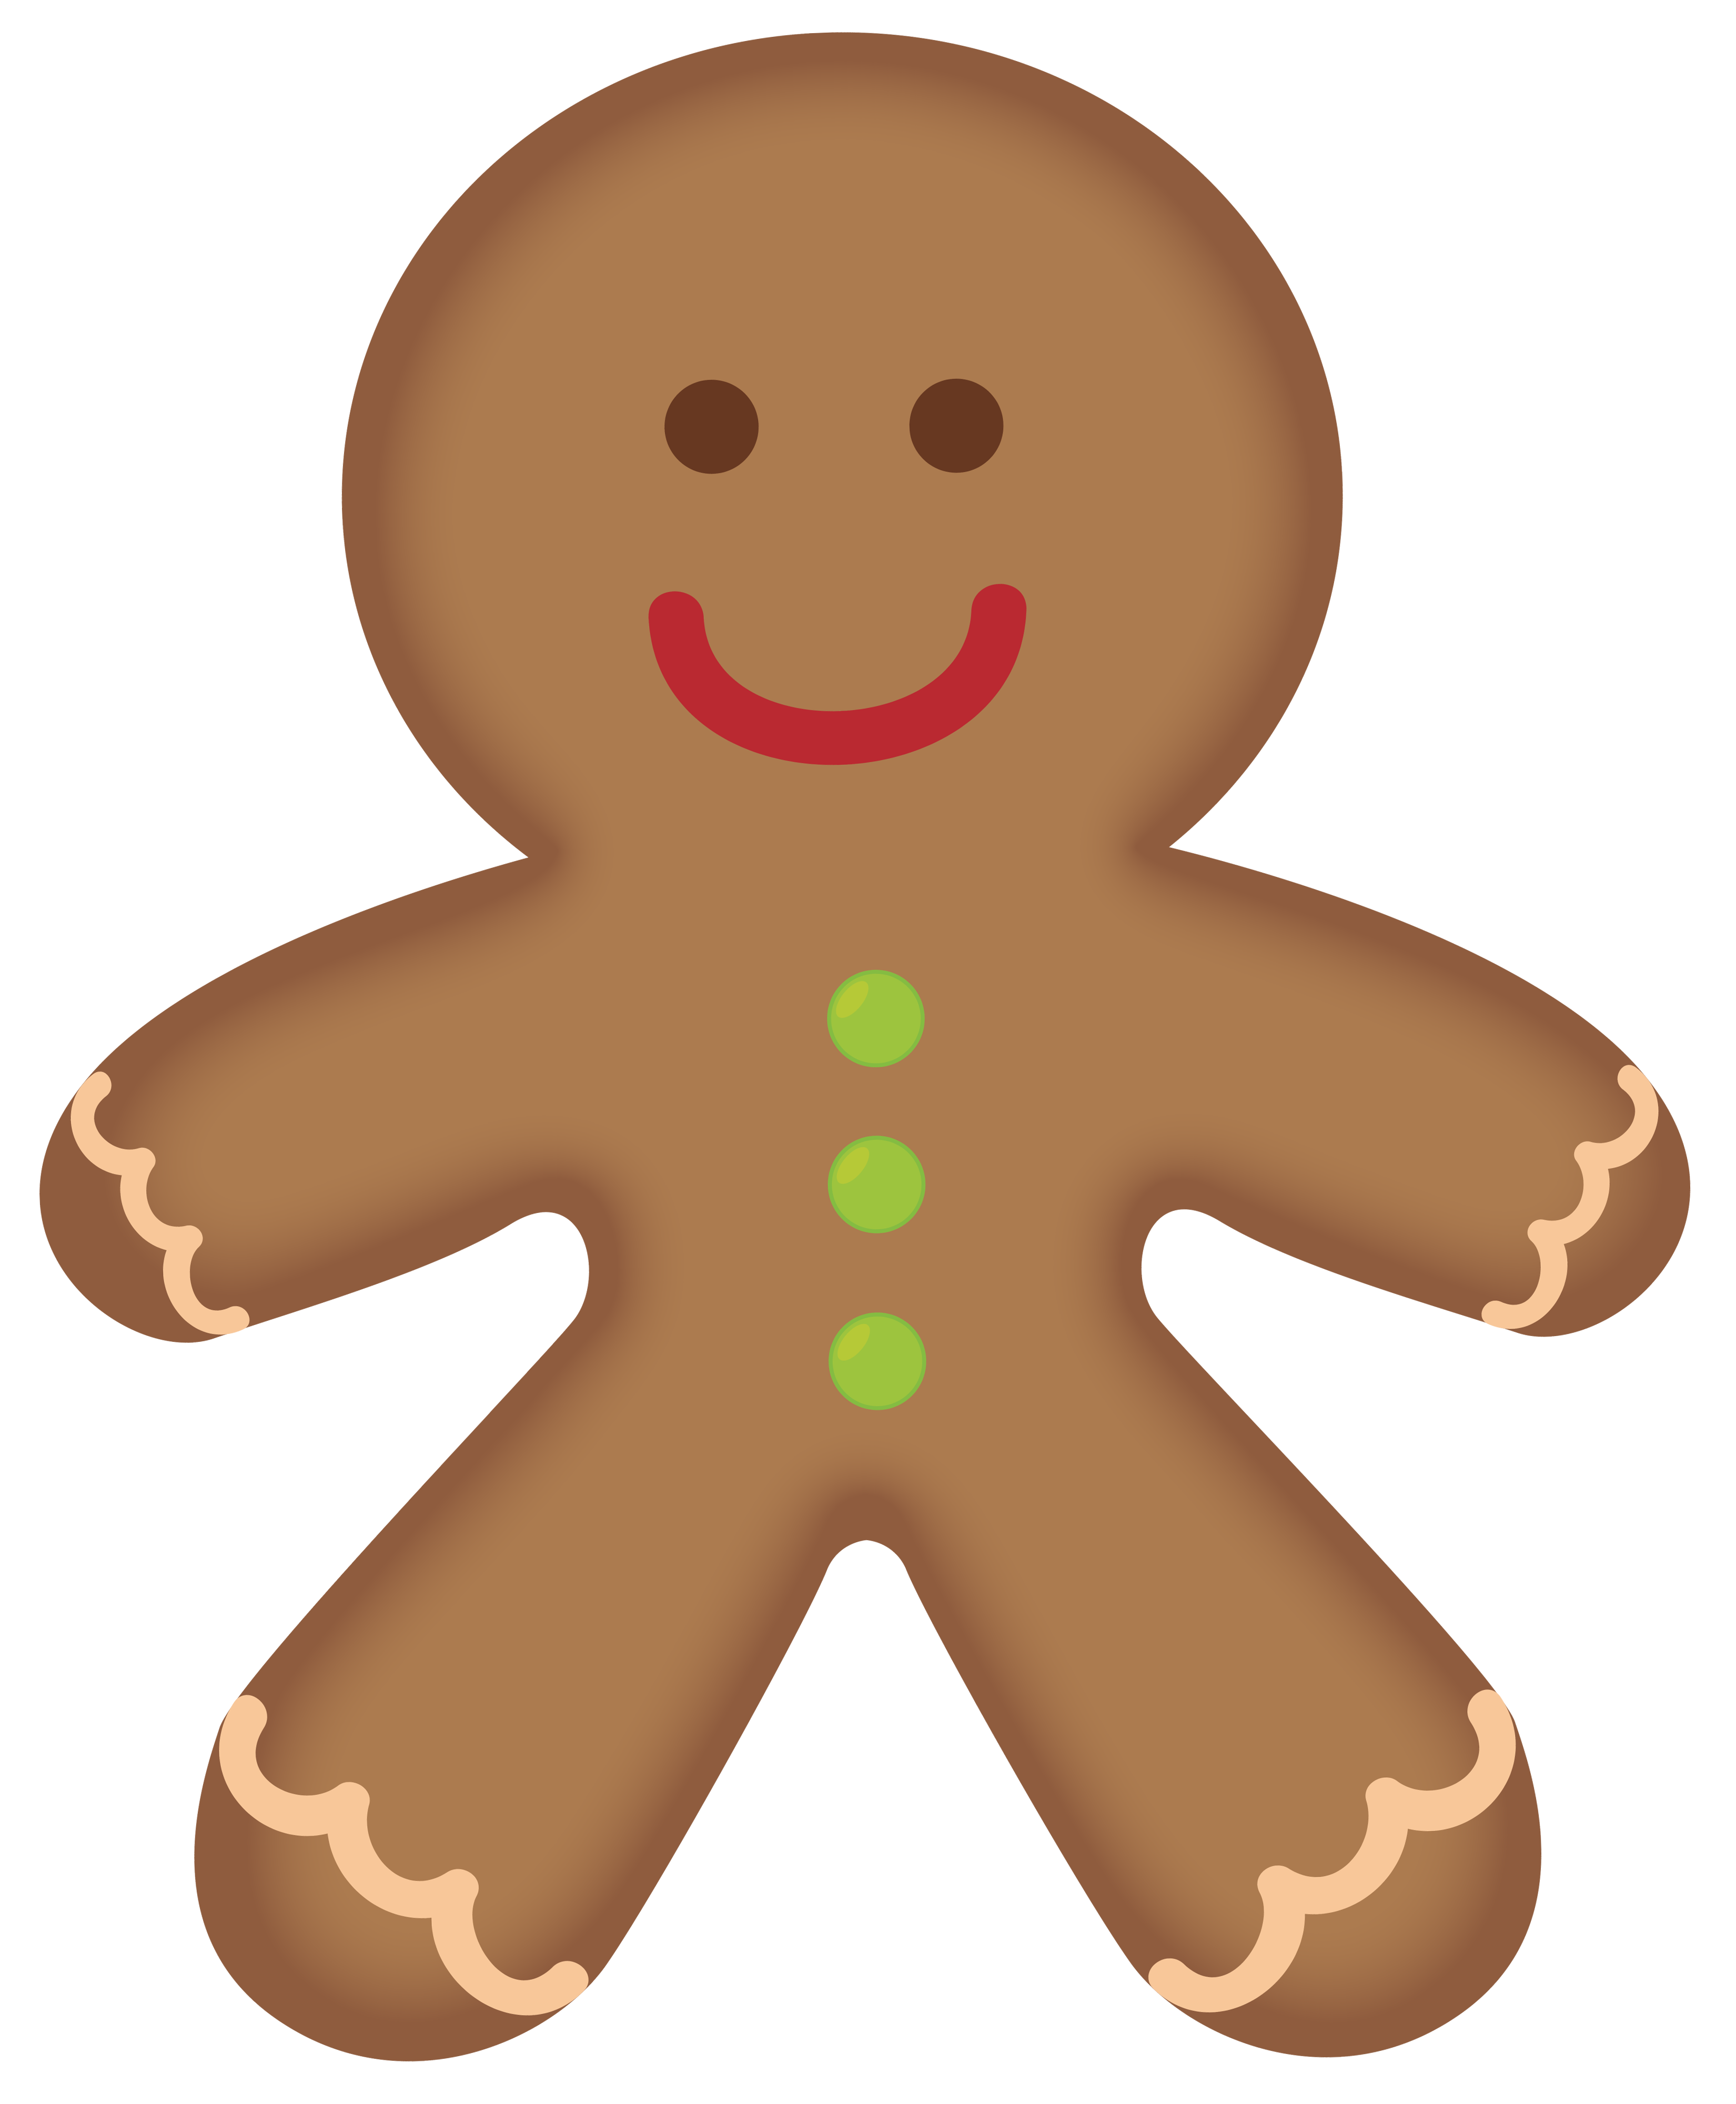 Free Gingerbread Man Clipart Pictures 